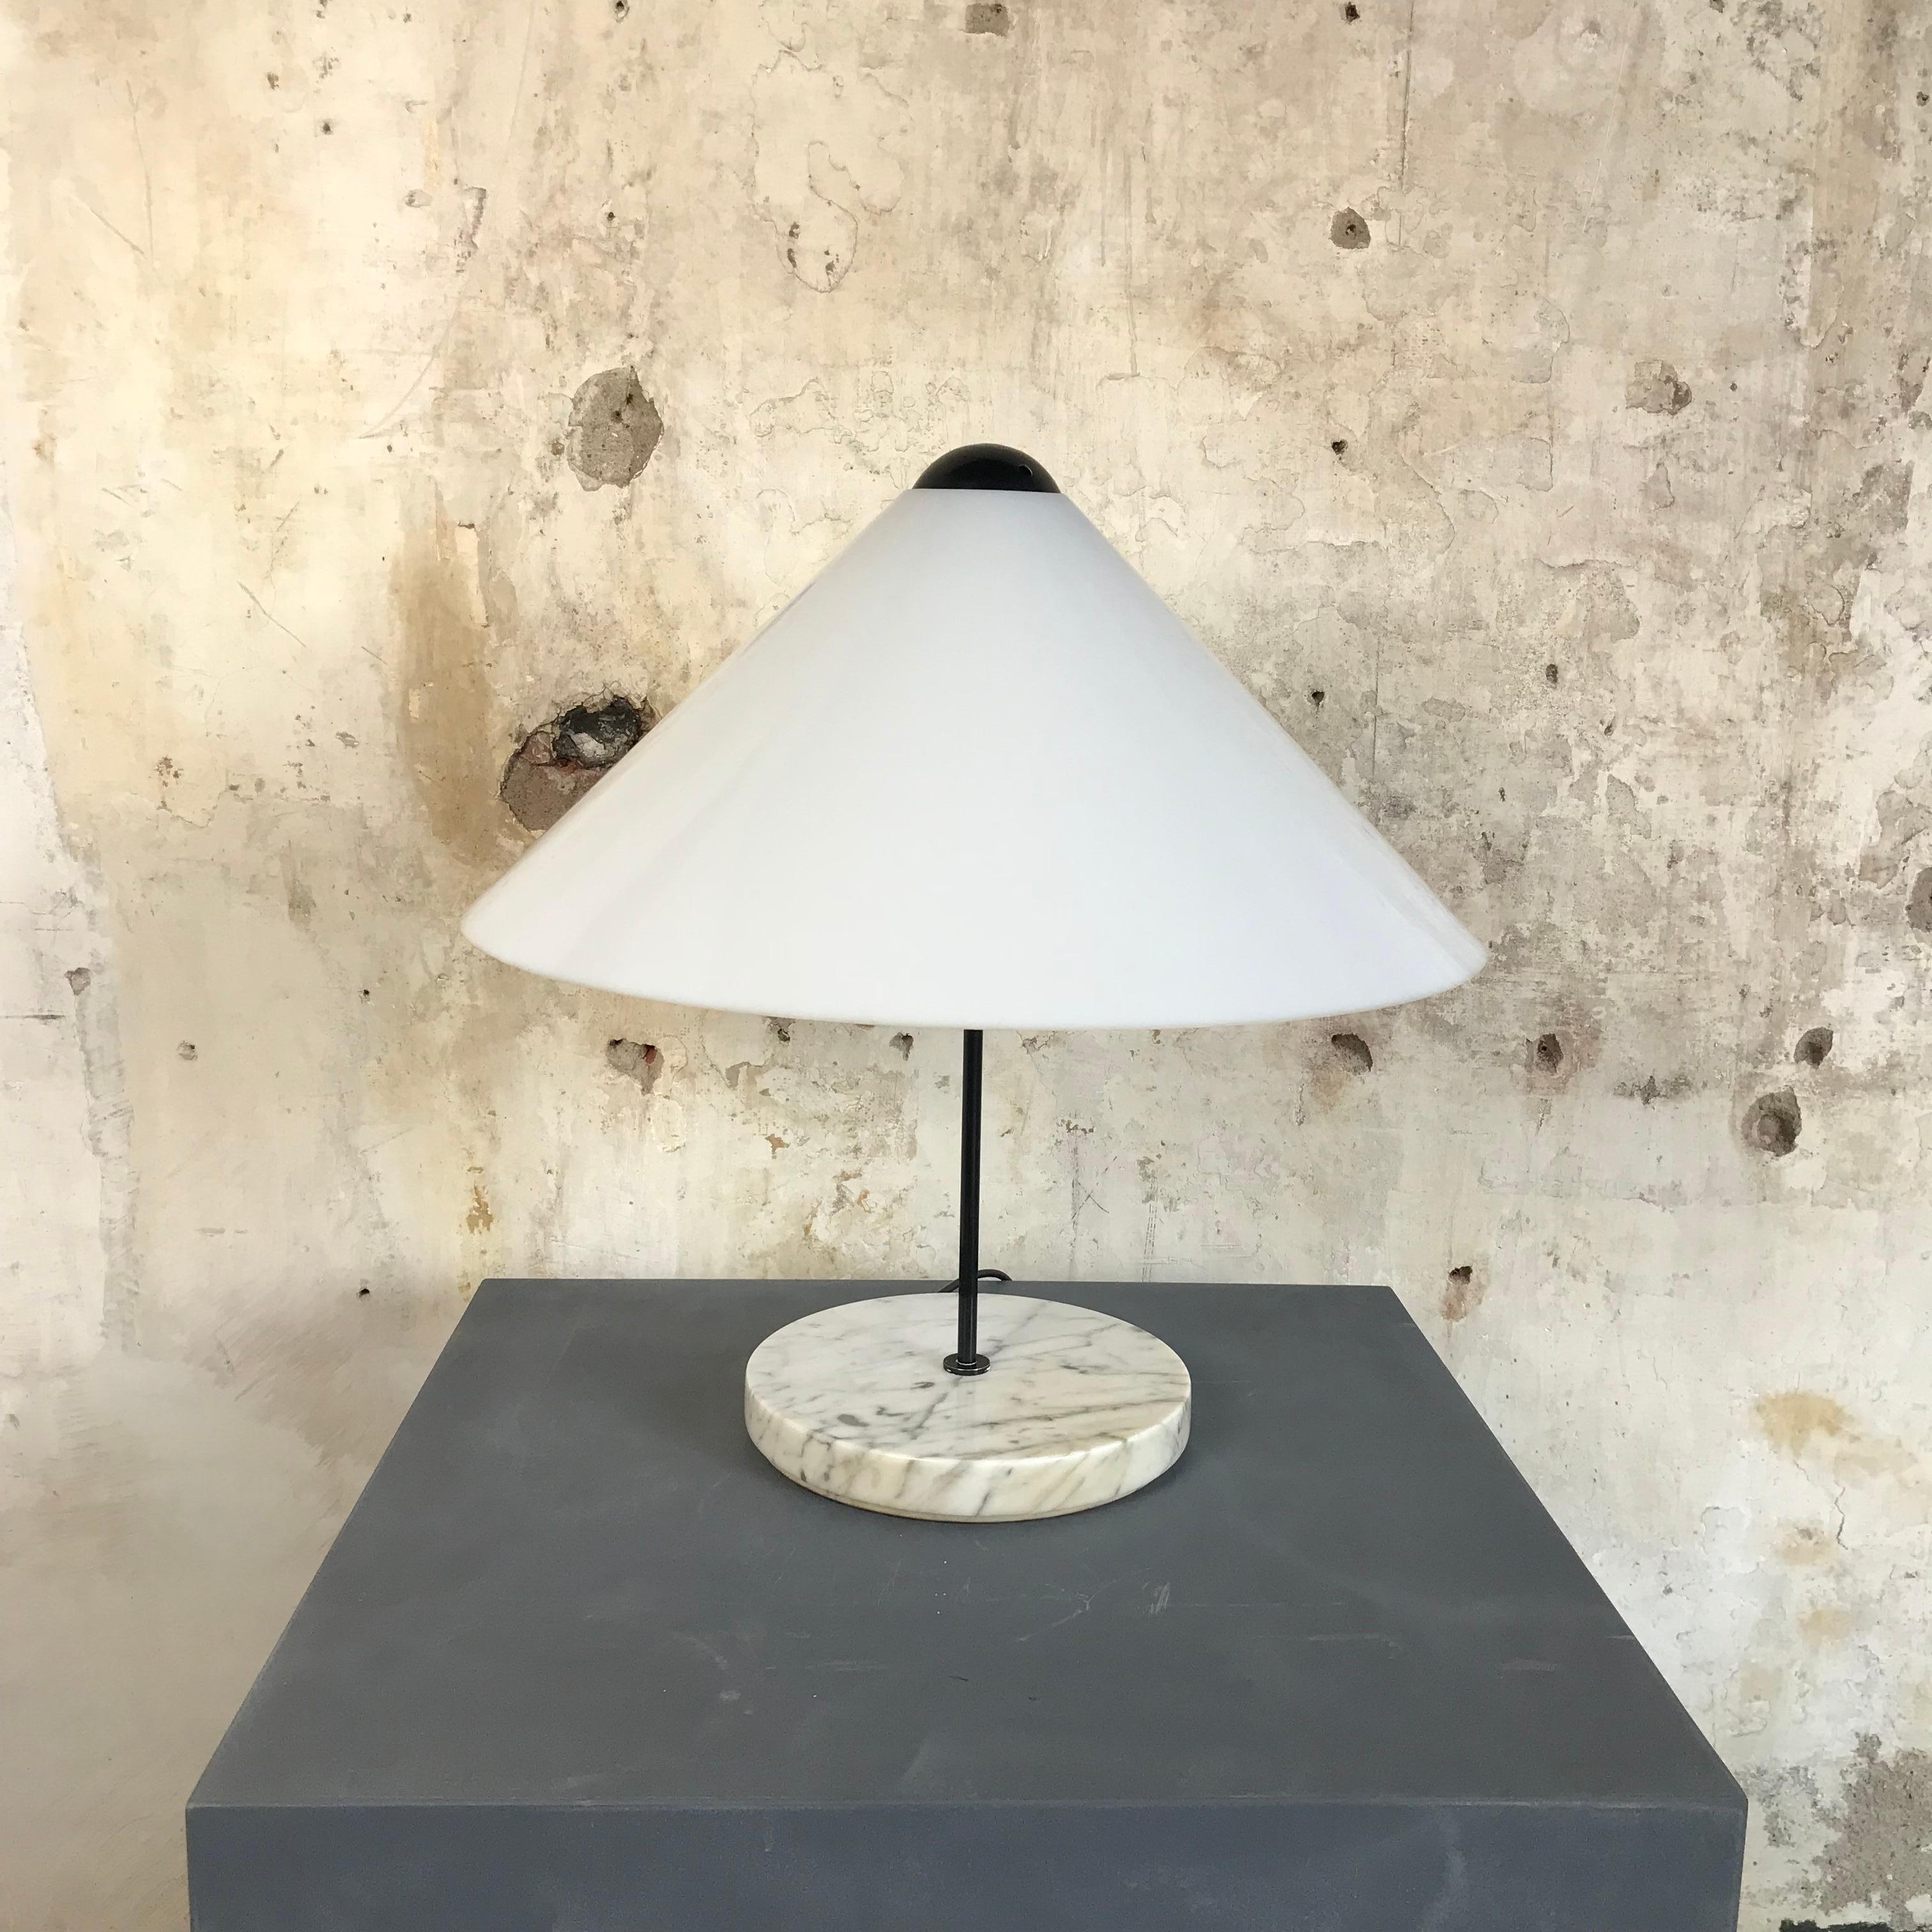 Italian Rare Vintage ‘Snow’ Table Lamp Designed by Vico Magistretti for Oluce, 1974